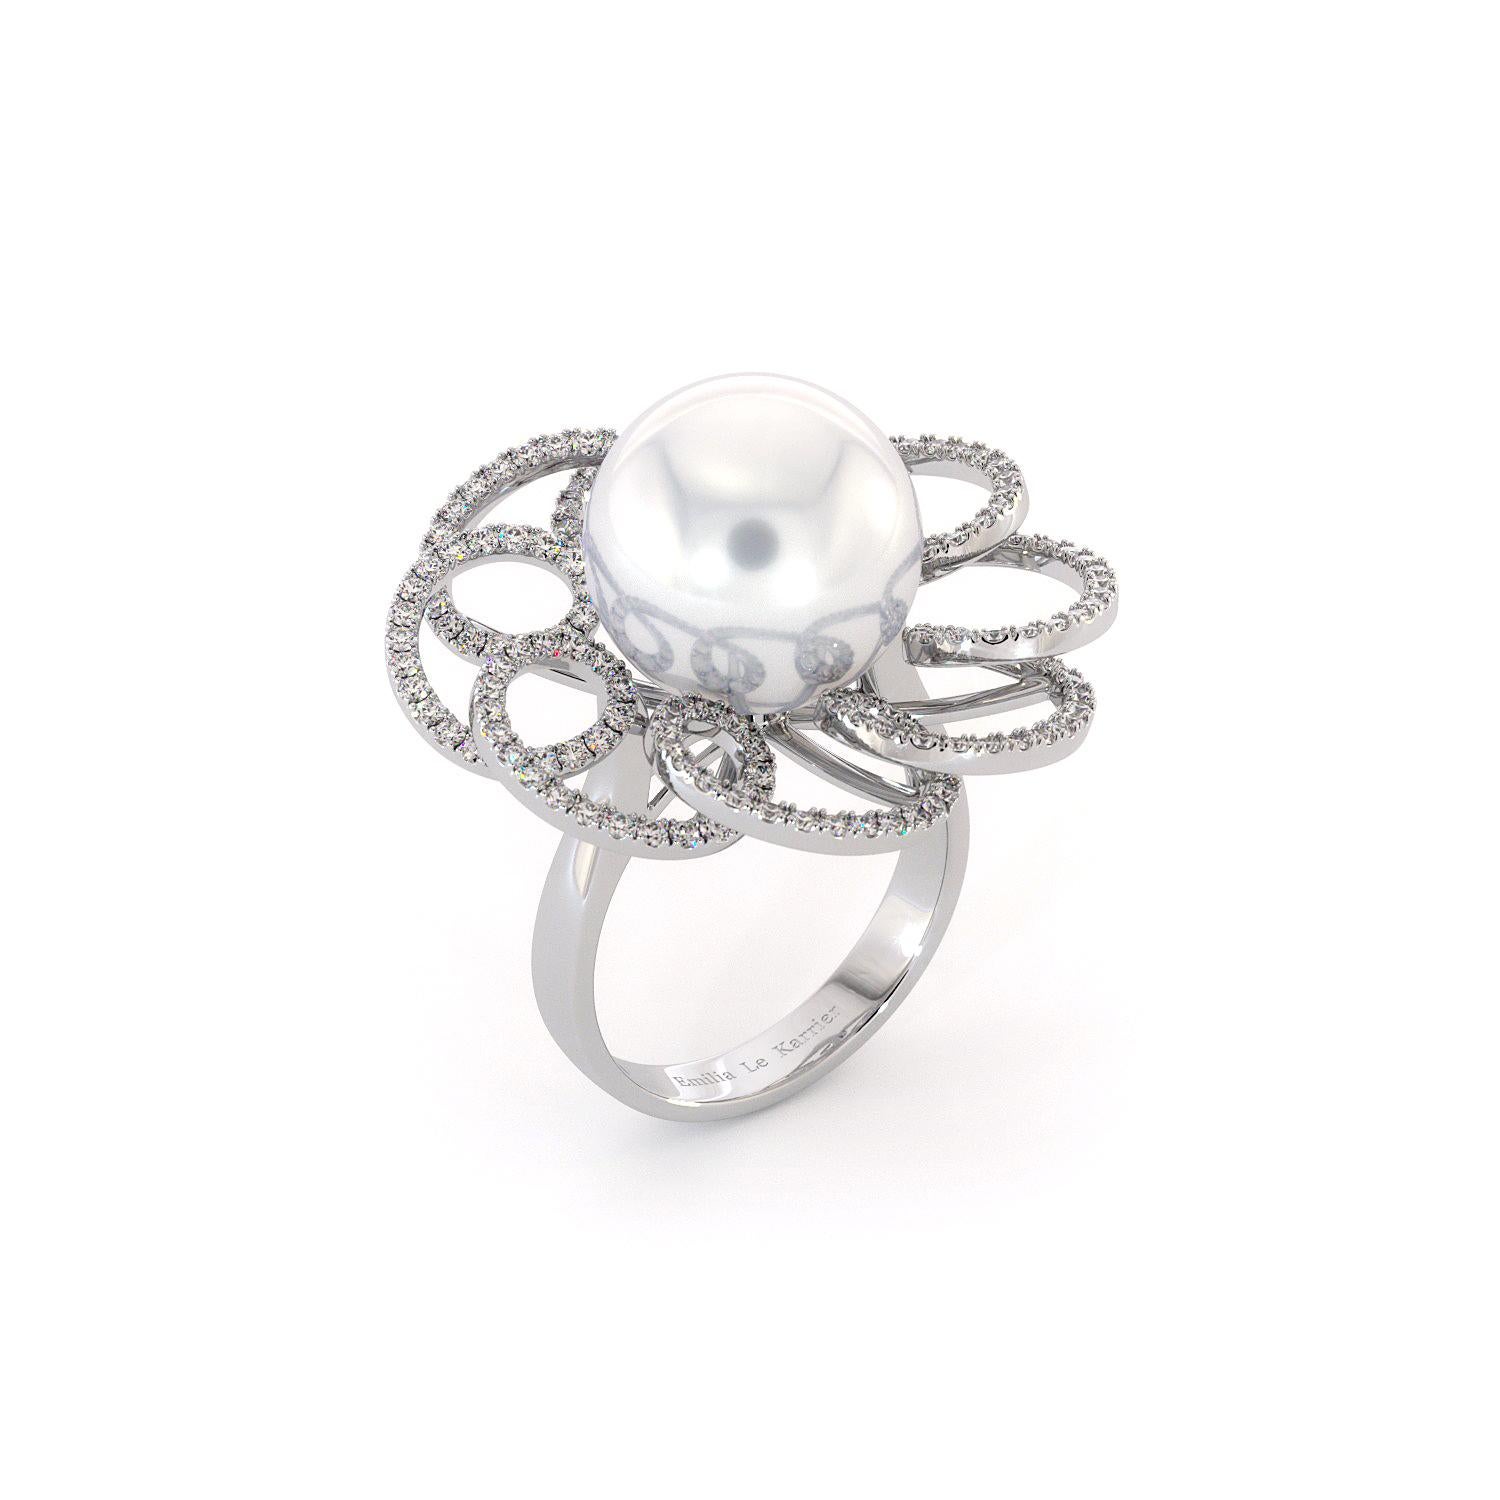 For Sale:  18K White Gold White South Sea Pearl Diamonds Ring by Emilia Lekarrier Certified 5